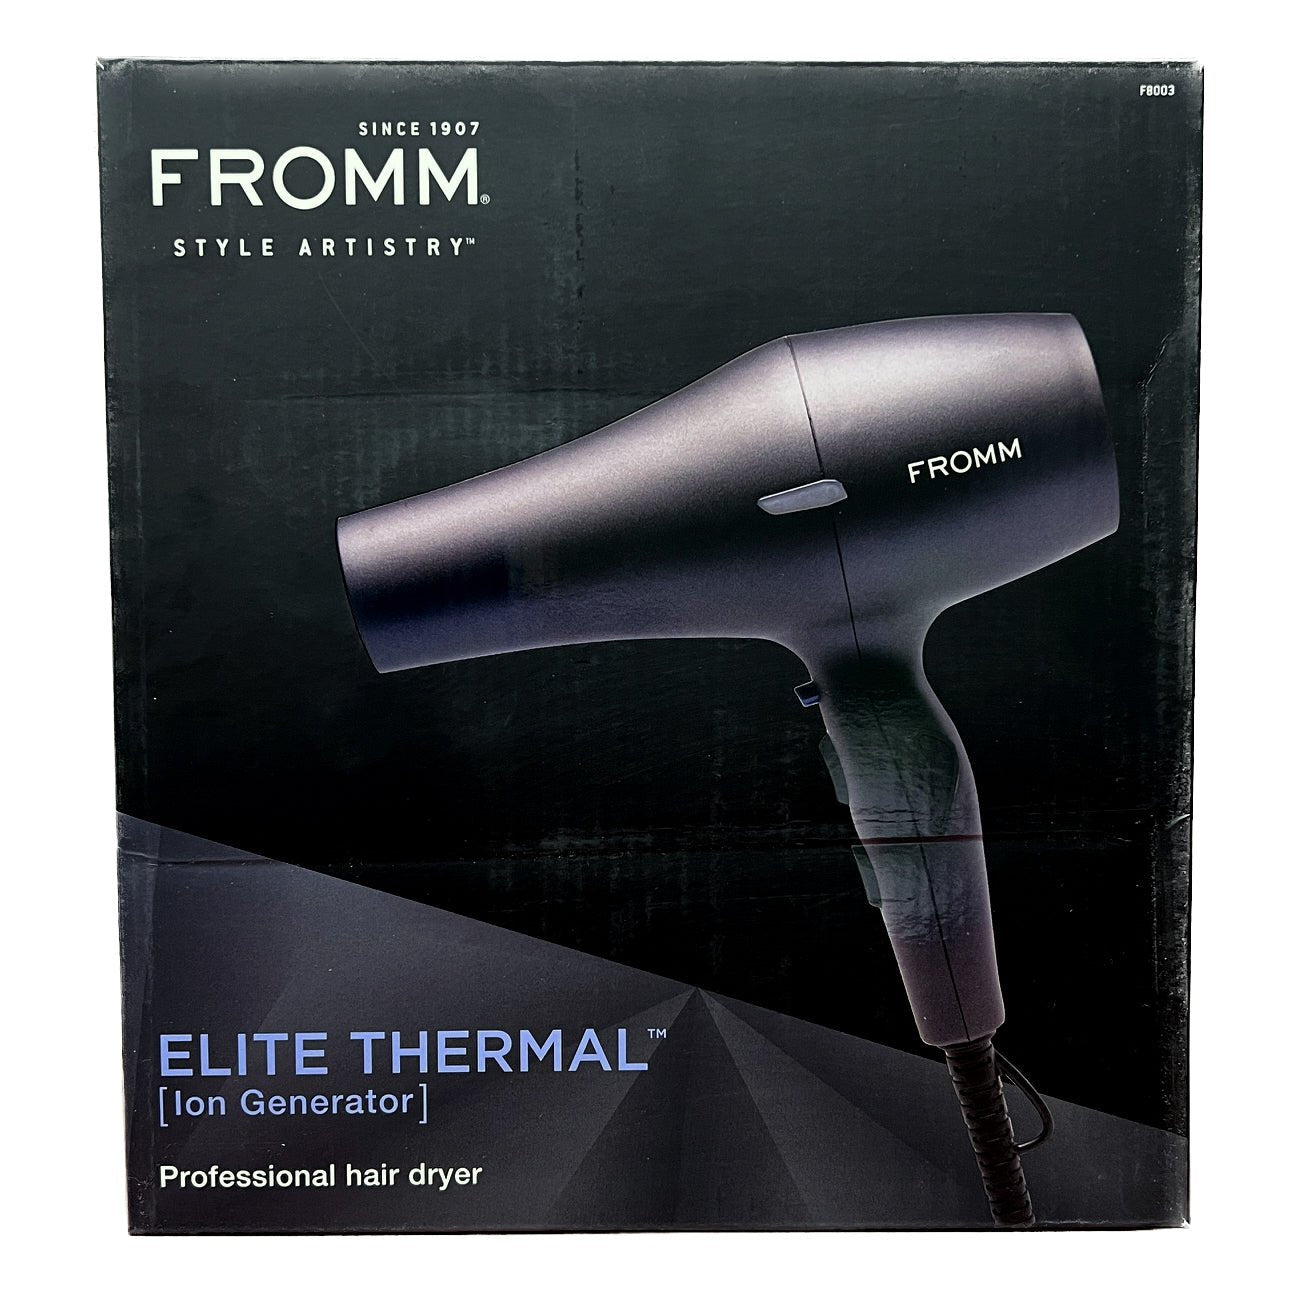 Elite Thermal [Ion Generator] Professional Hair Dryer | F8003 | FROMM - SH Salons